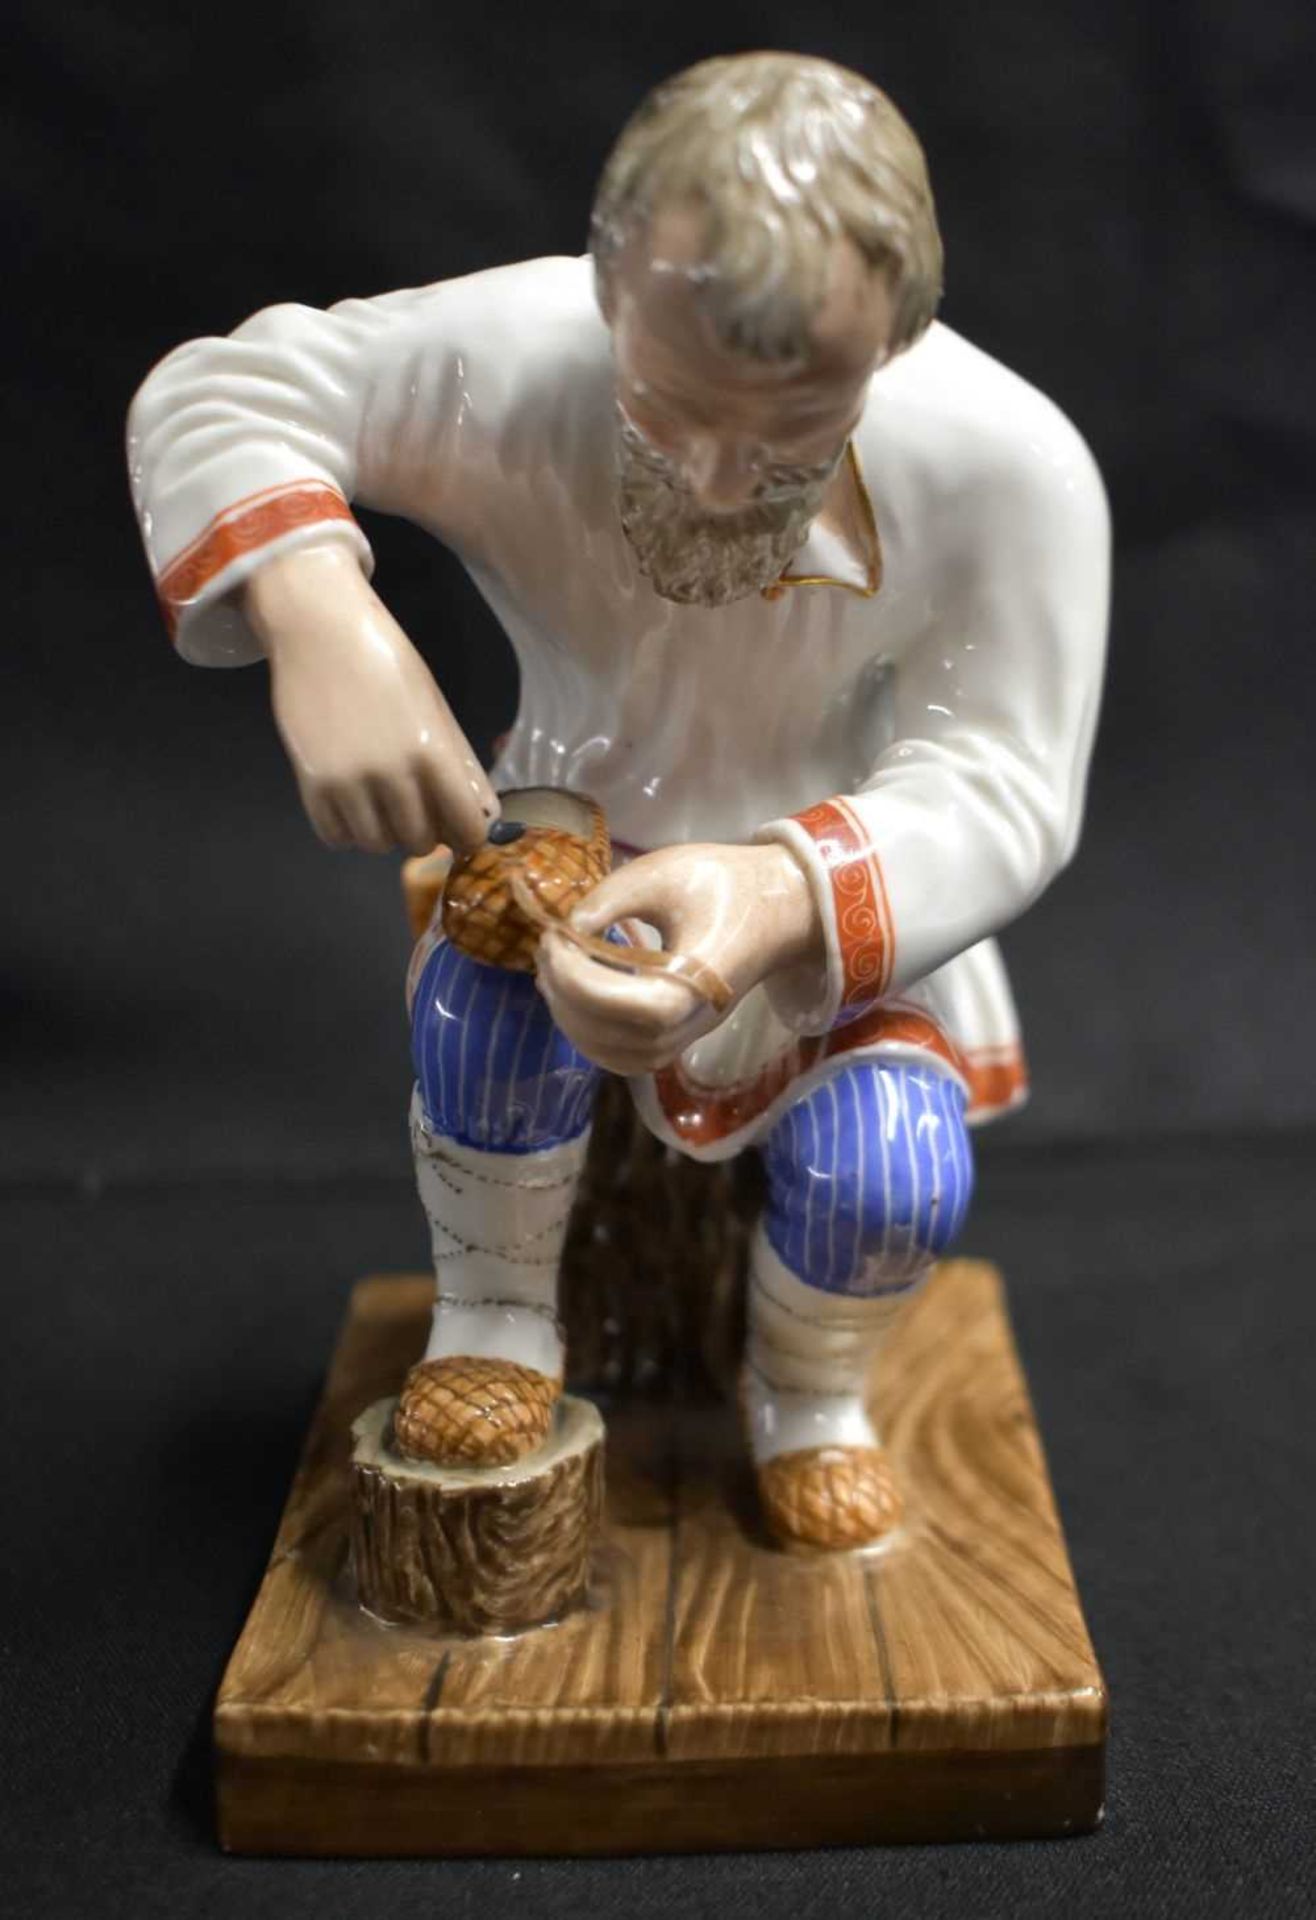 A LATE 19TH CENTURY RUSSIA ST PETERSBURG PORCELAIN FIGURE OF A COBBLER modelled repairing a shoe. 14